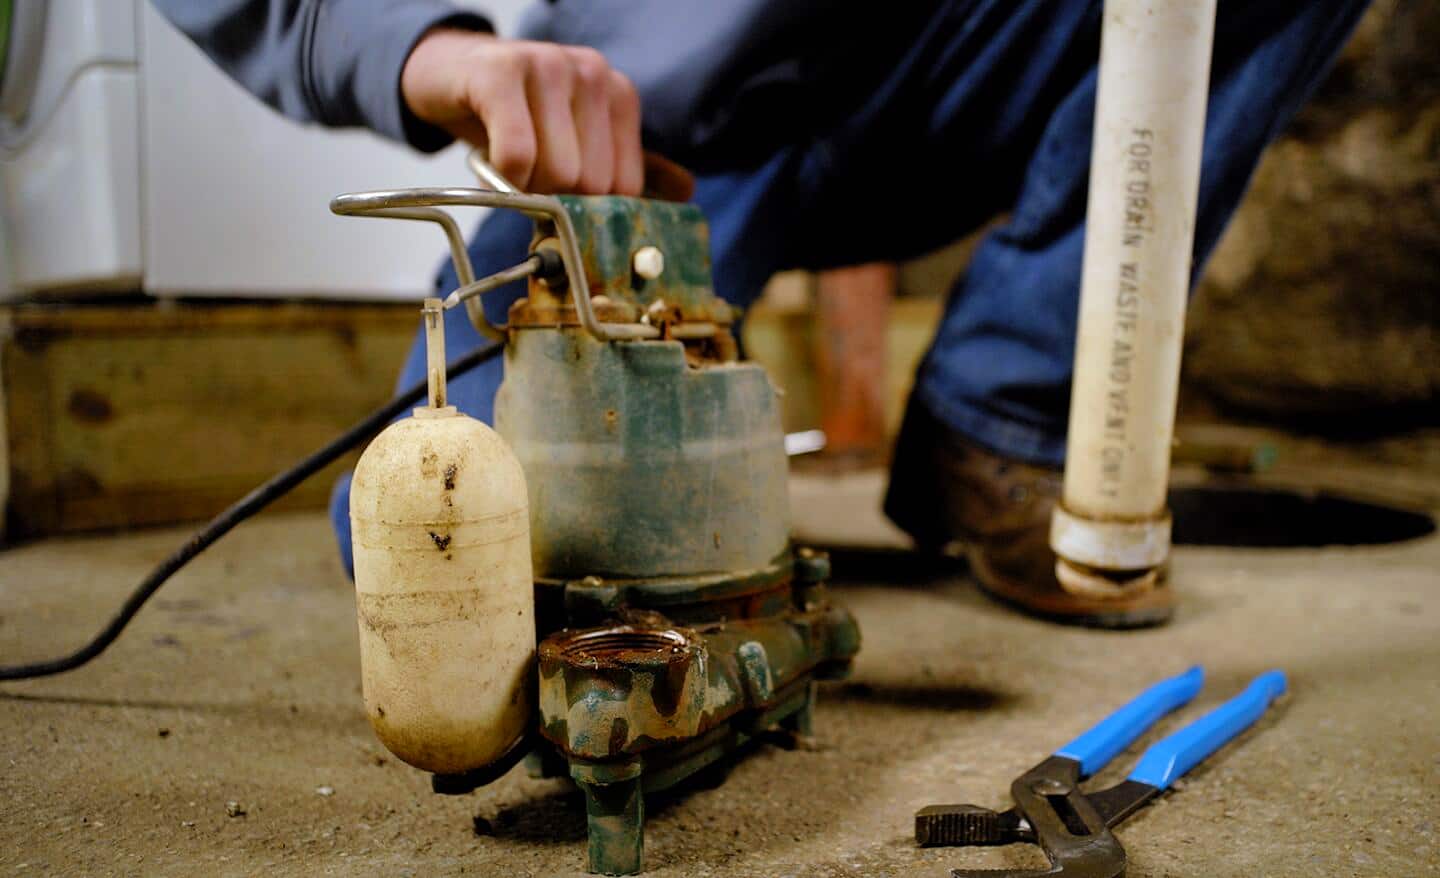 How to Replace a Sump Pump - The Home Depot